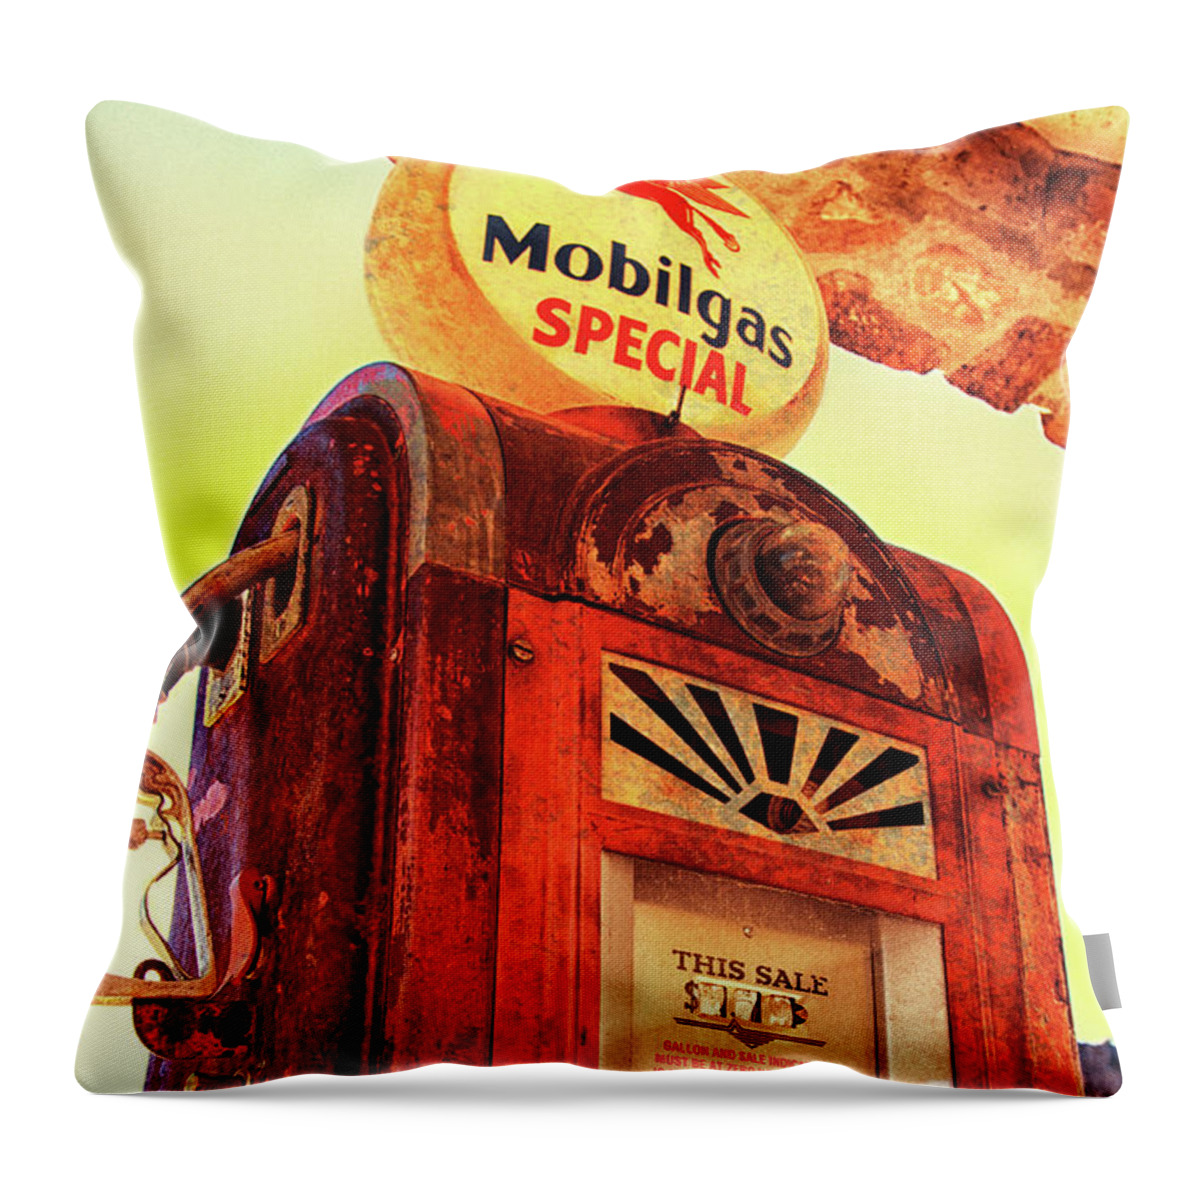 Mobilgas Throw Pillow featuring the photograph Mobilgas Special - Vintage Wayne Pump by Tatiana Travelways